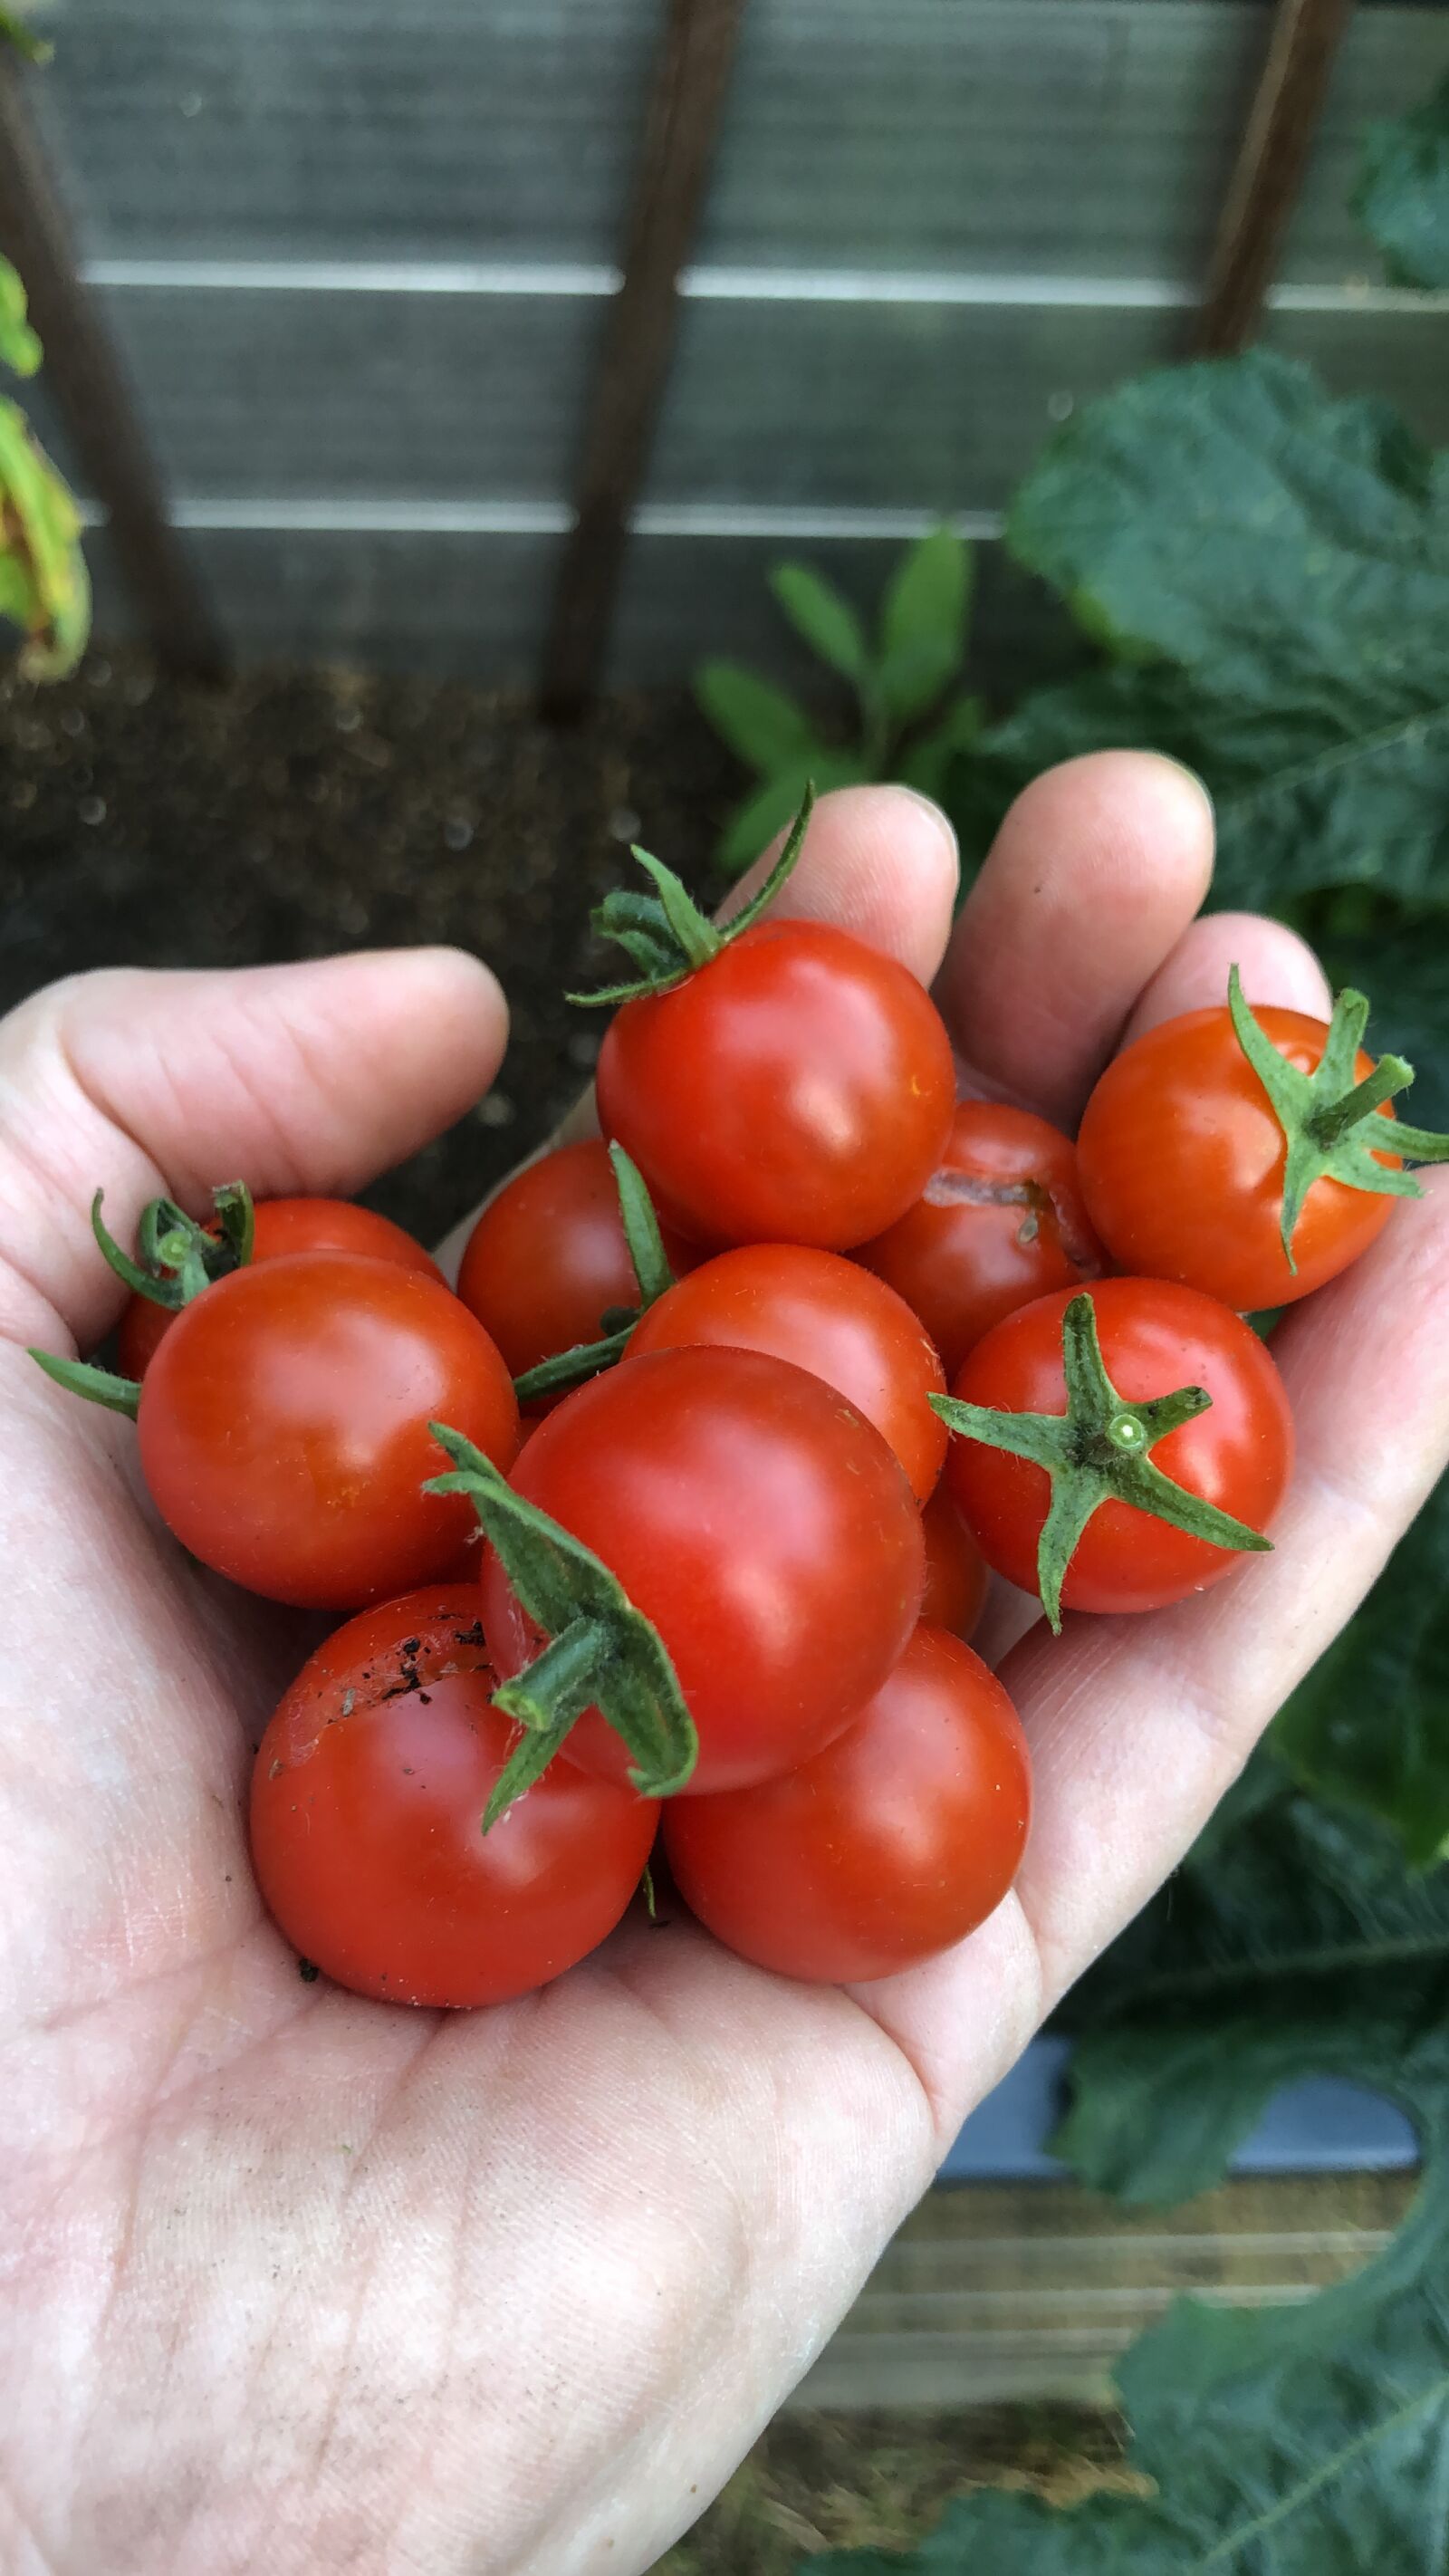 iPhone 8 Plus back camera 3.99mm f/1.8 sample photo. Hand, tomatoes, harvest photography